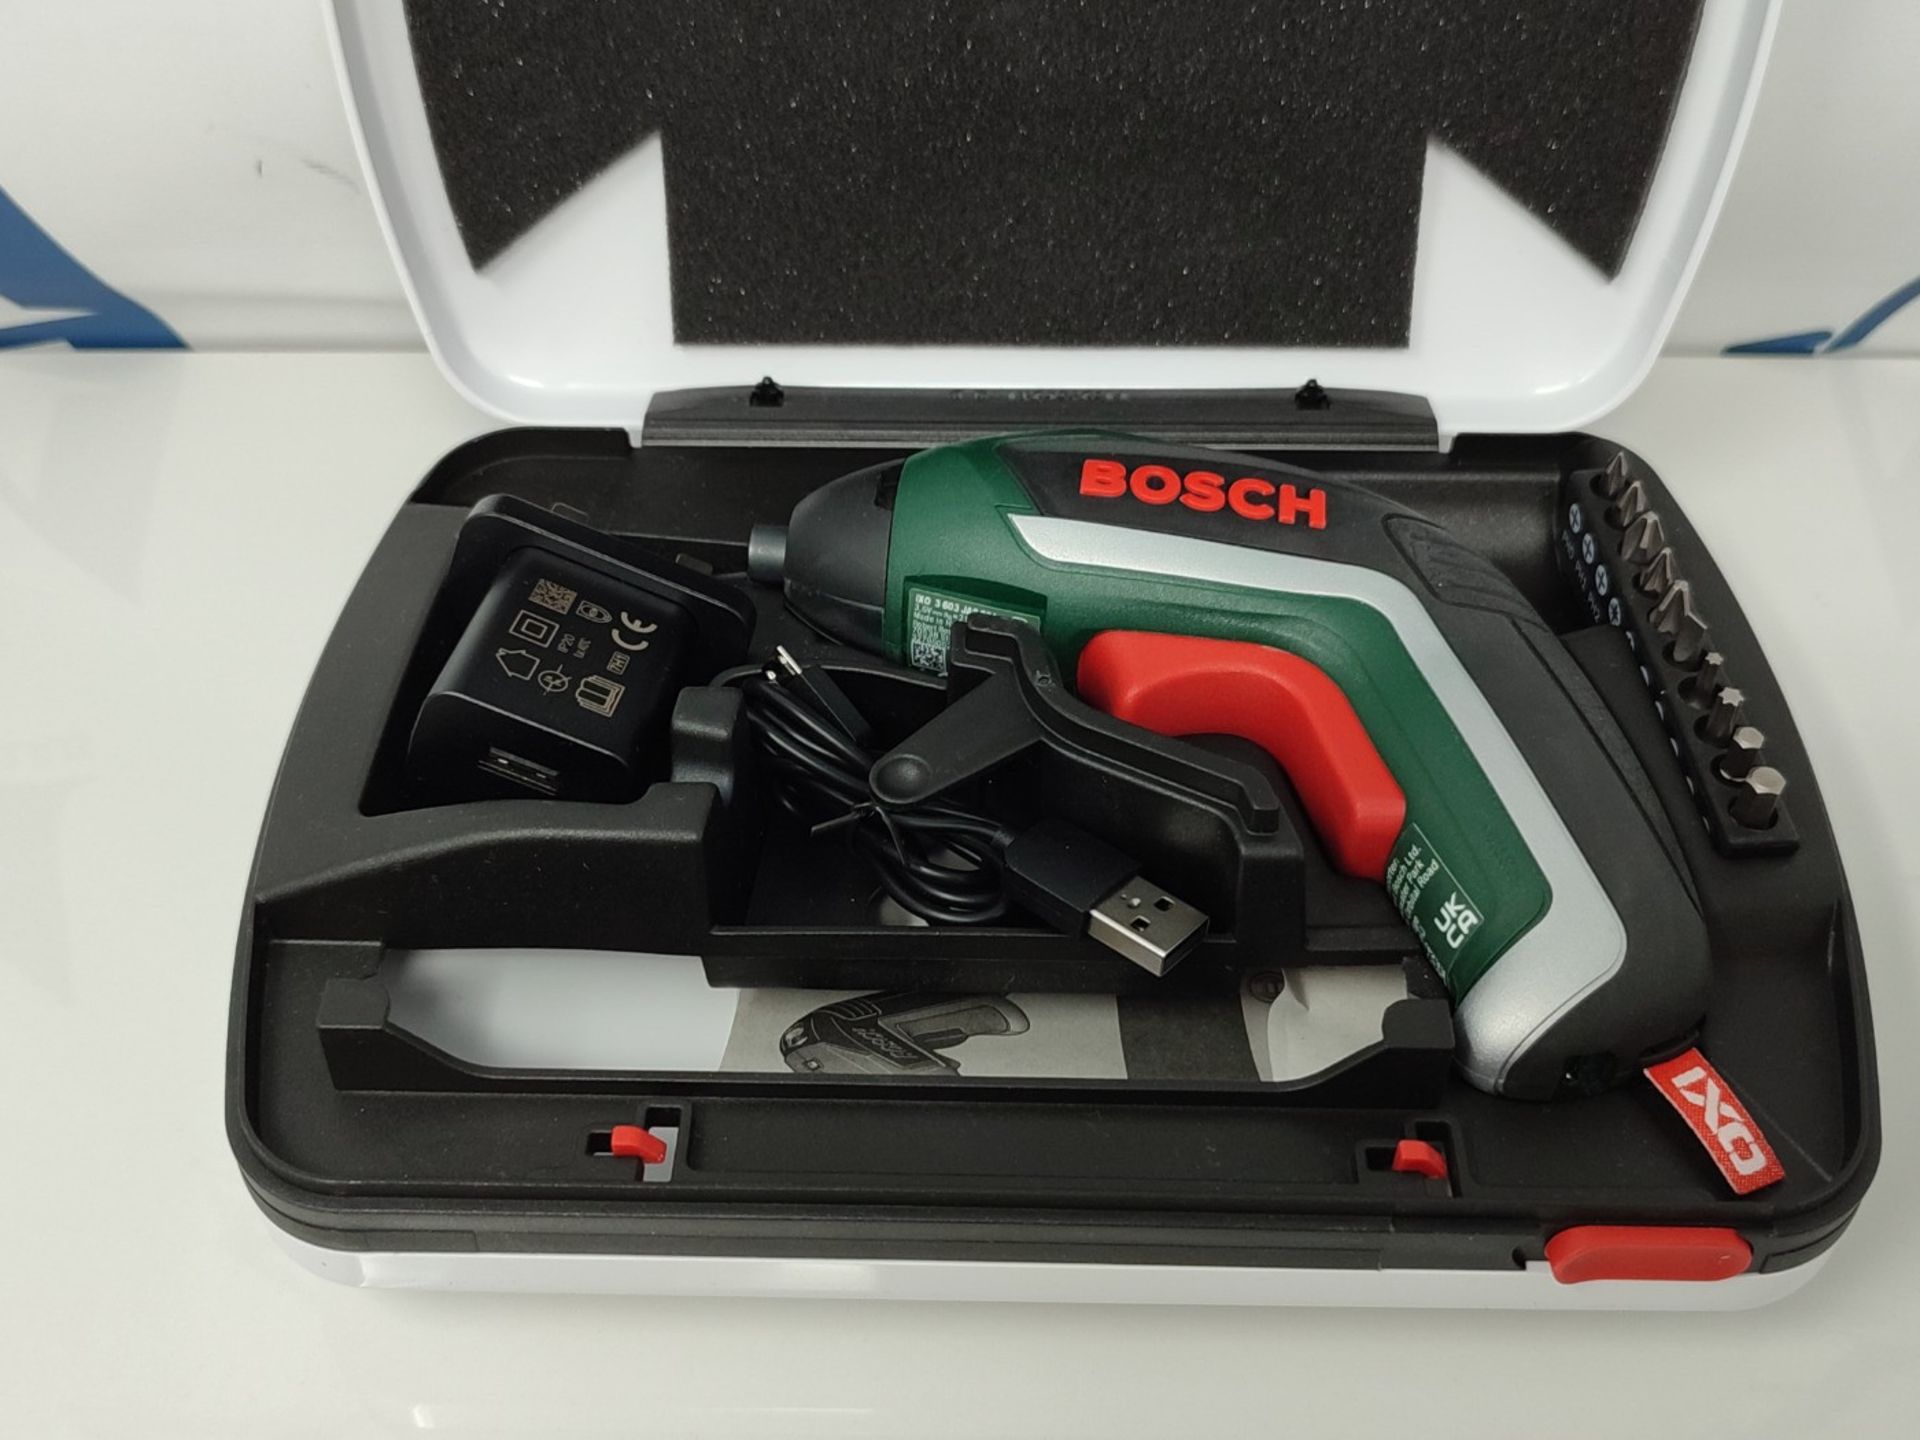 Bosch Home and Garden Cordless Screwdriver IXO (5th generation, 3.6 V, in case) - Image 3 of 3